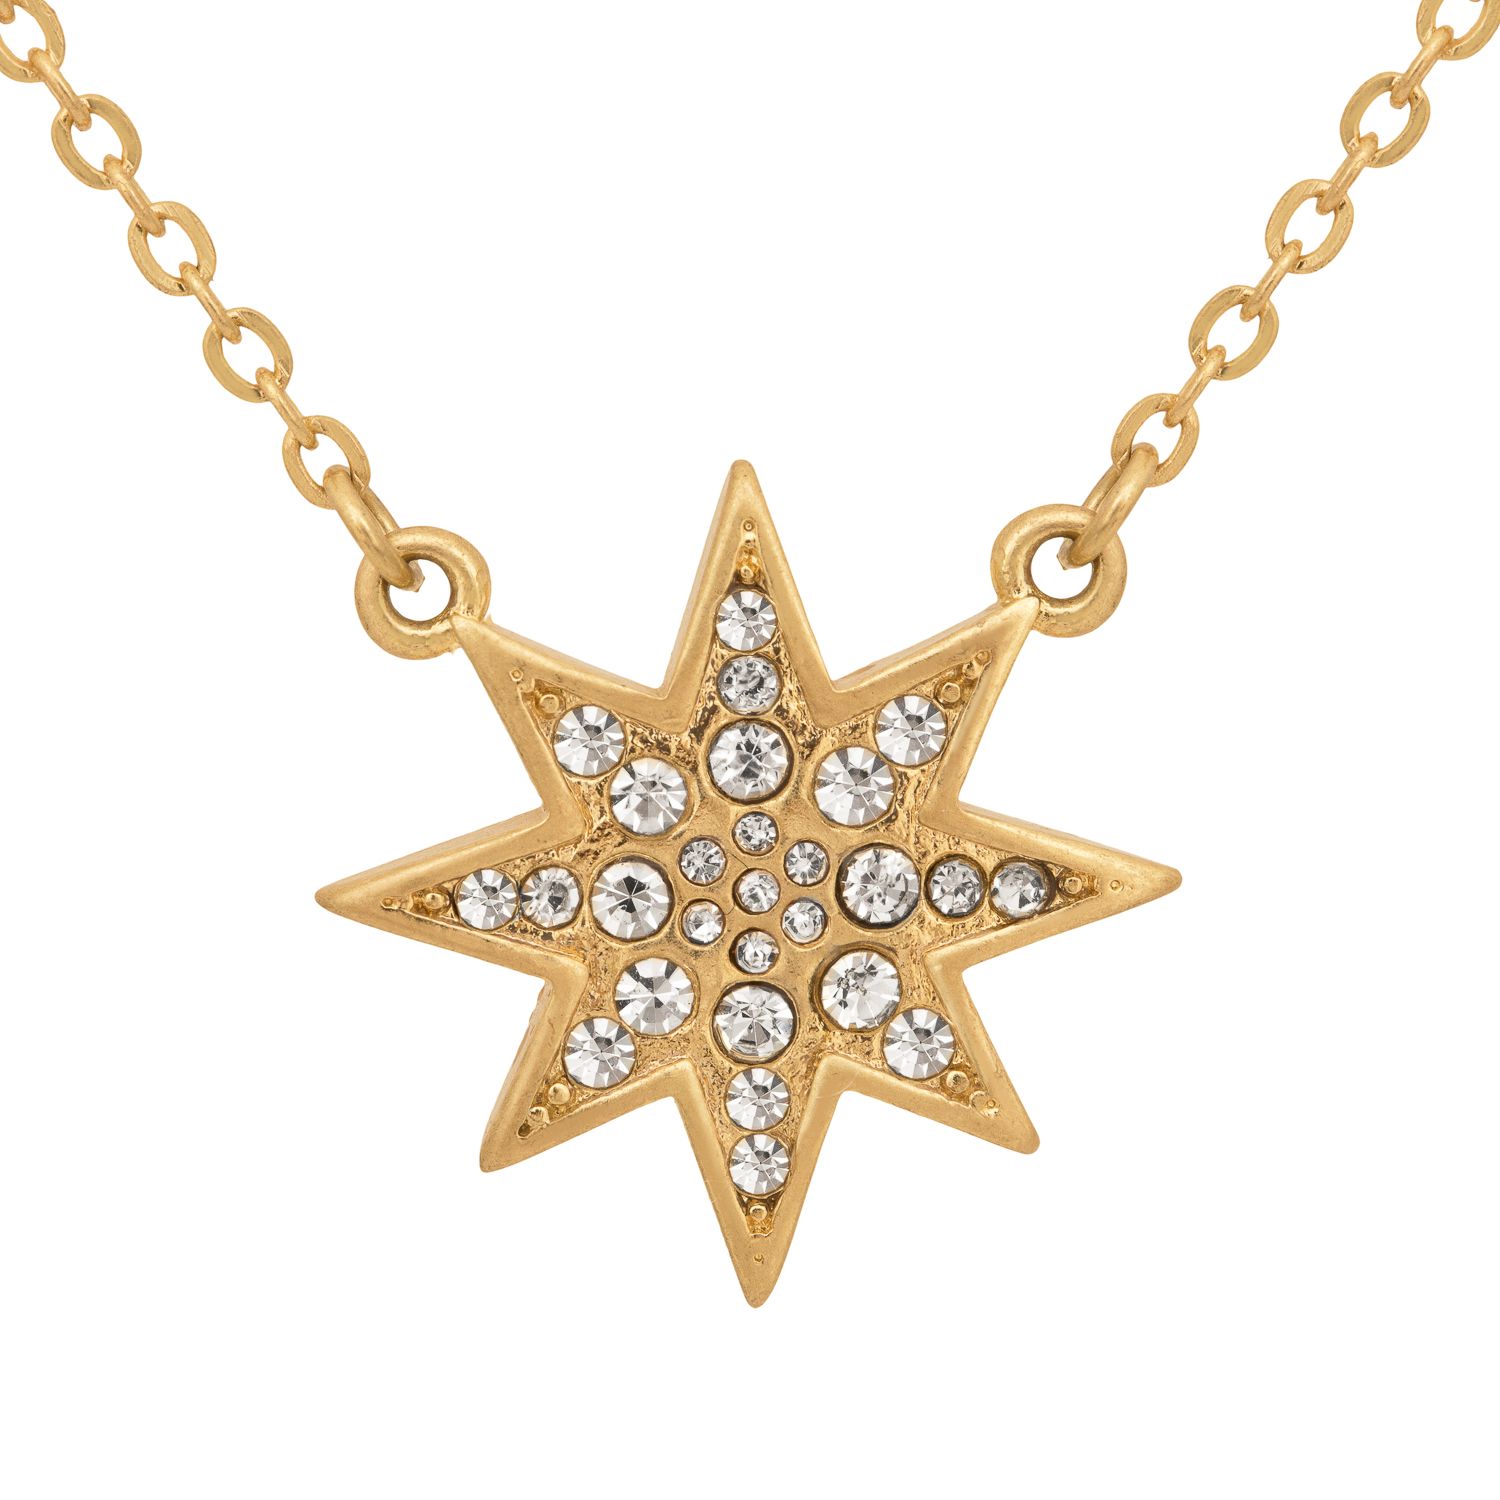 Step into the season in our Kate Thornton gold plated Glistening Star Necklace, that's perfect for perching on top of simple white tees, layering with statement necklaces or paired with a cute little dress. A versatile piece that can be worn from season to season that boasts 2 pave glistening stars to add a chic subtle statement and a little bit of sparkle! The gold tone friendship necklace is 65cm in length with a slider fastening for ease of wear. Presented in a KTx jewellery pouch to keep your jewellery safe or ideal for gifting!